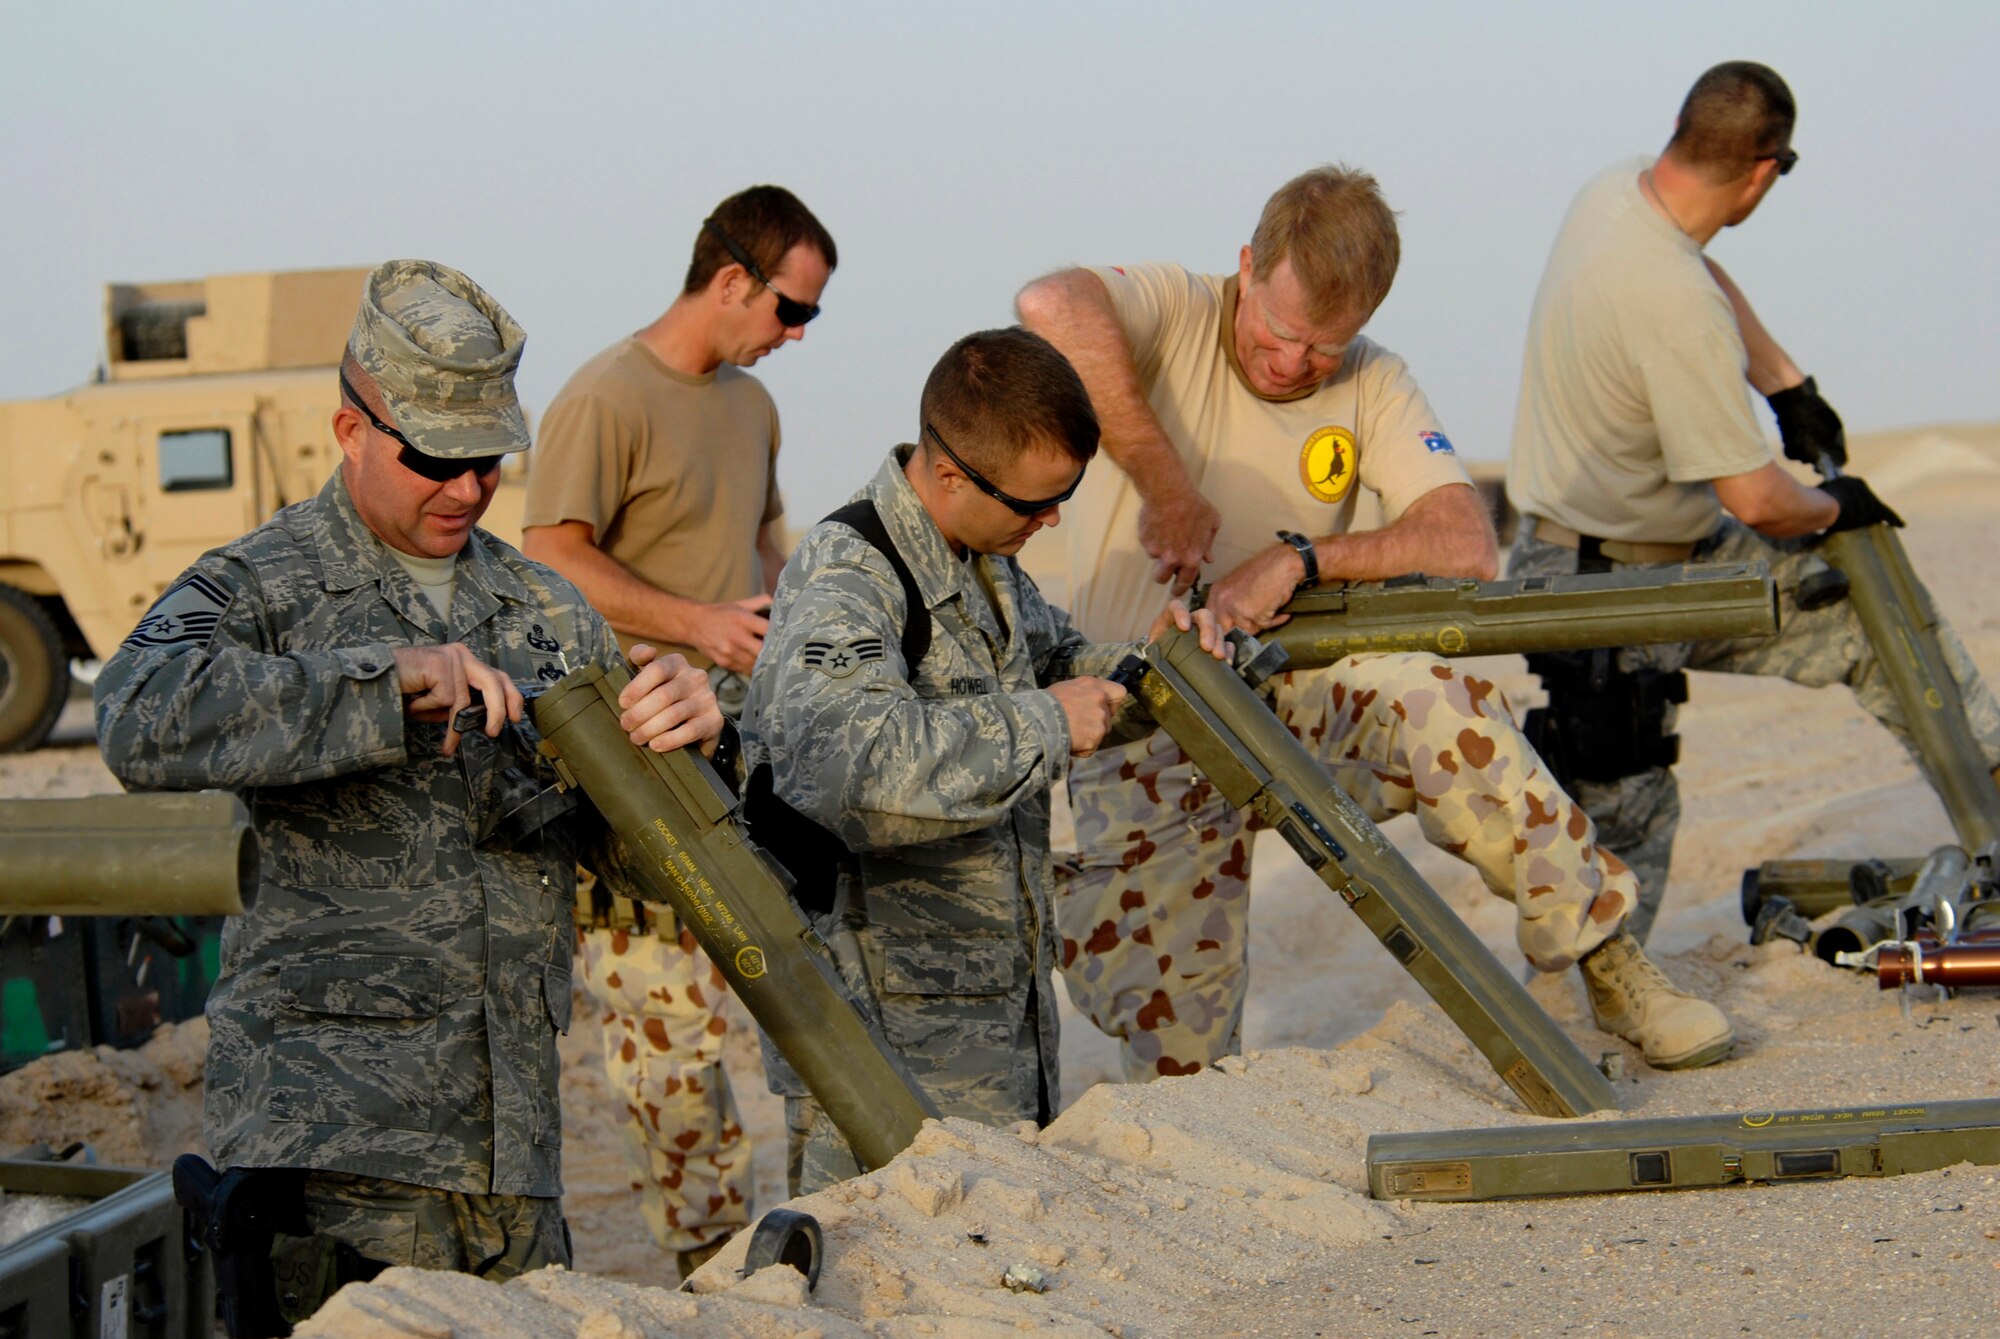 Members from the 386th Expeditionary Civil Engineer Squadron Explosive Ordnance Disposal Flight and Australian army ammunition technicians prepare light anti-armor weapon rockets for disposal in prior to a controlled detonation June 20 at an EOD range in Southwest Asia. The controlled detonation is destroying unserviceable munitions. The joint detonation also provided an opportunity for the U.S. and coalition forces to enhance their relations while learning some of the slight differences in operating procedures. (U.S. Air Force photo/Staff Sgt. Patrick Dixon) 
